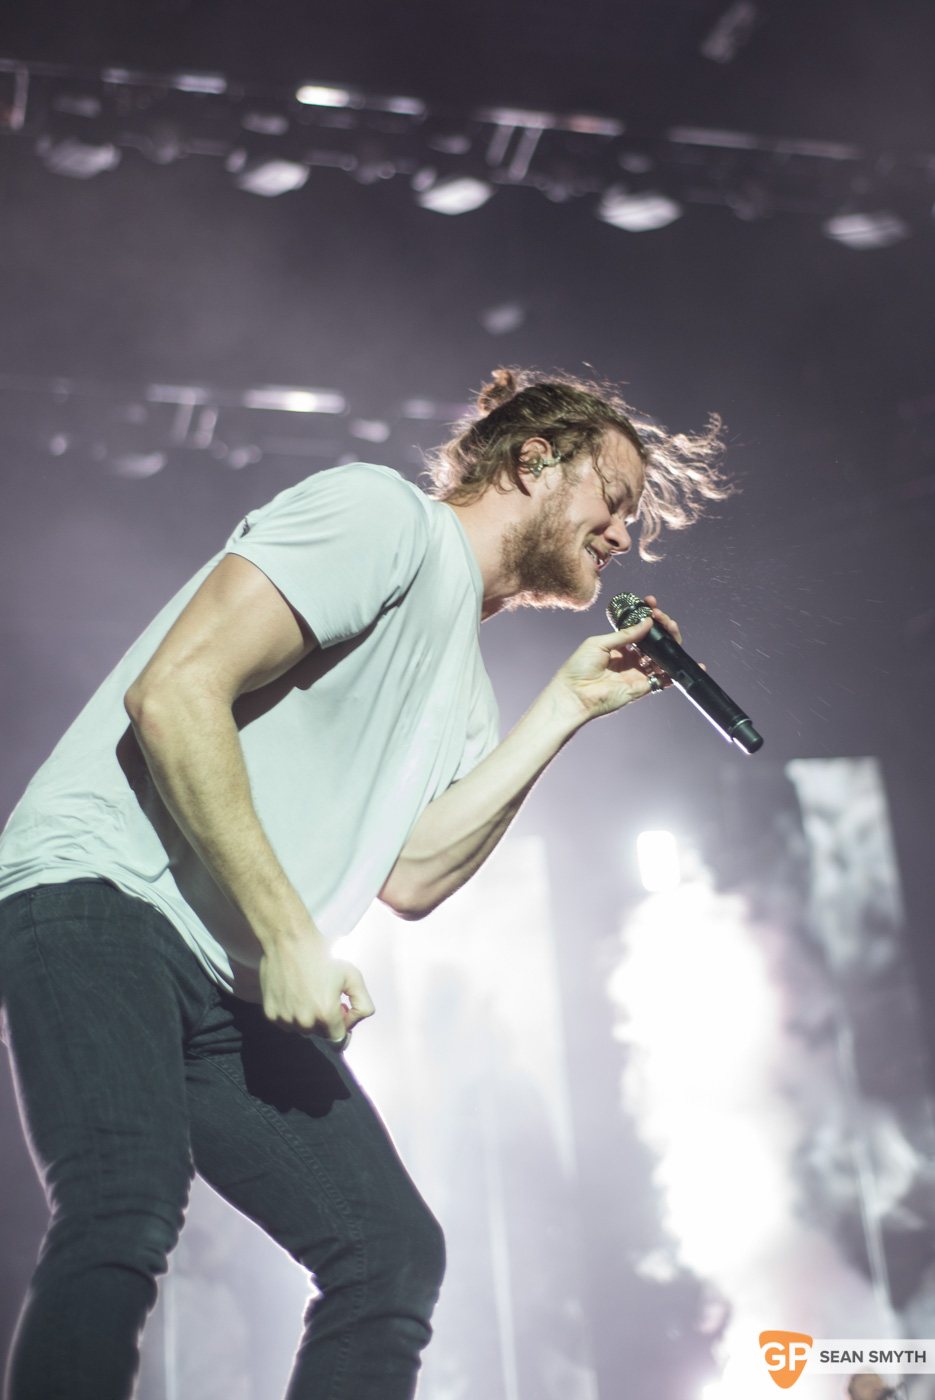 Imagine Dragons at 3Arena by Sean Smyth (18-11-15) (43 of 50)